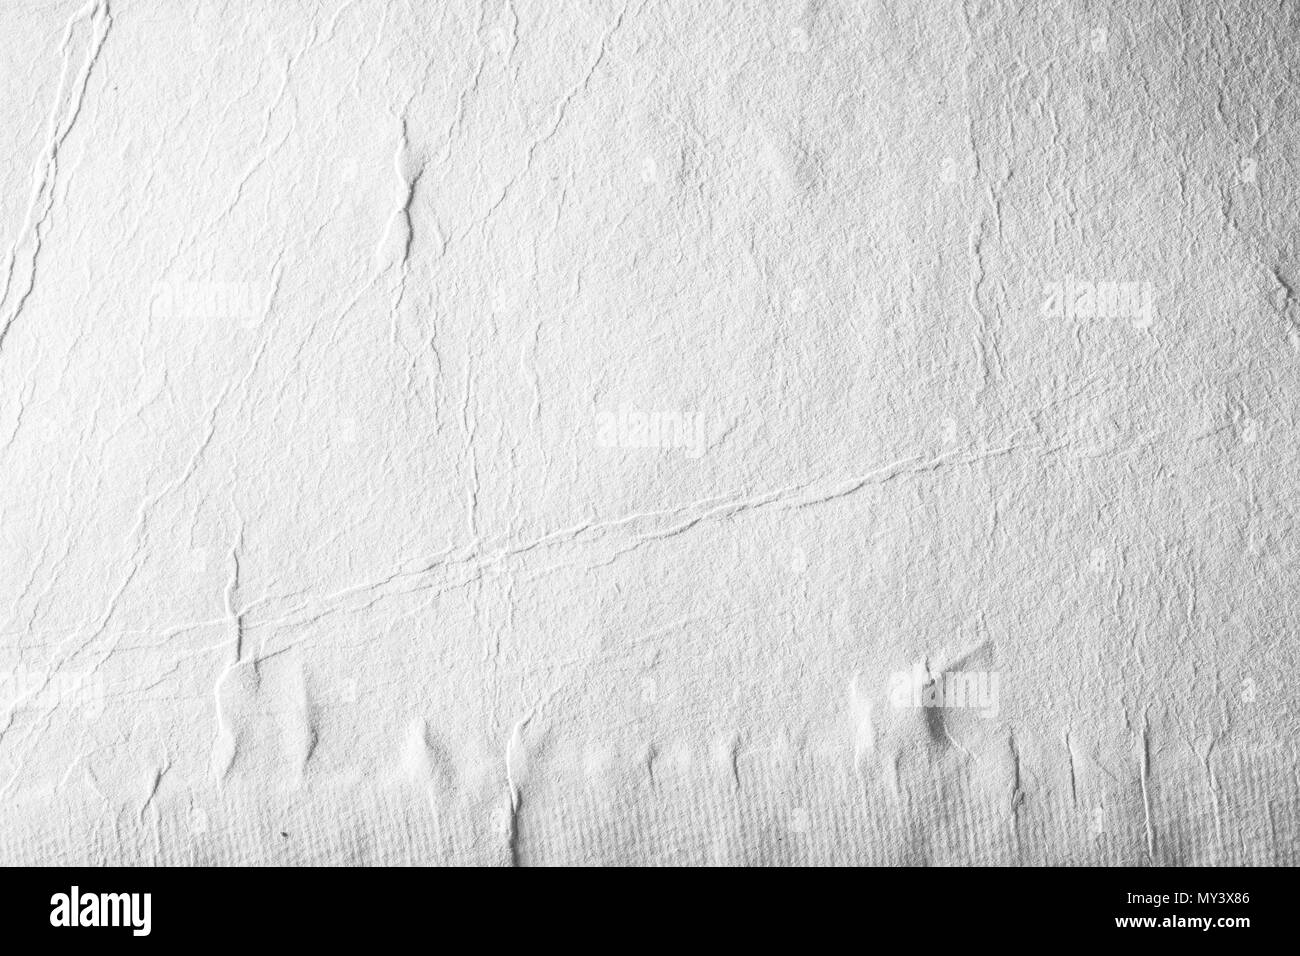 Old Vintage Paper Background Paper Texture Empty Old Paper Stock